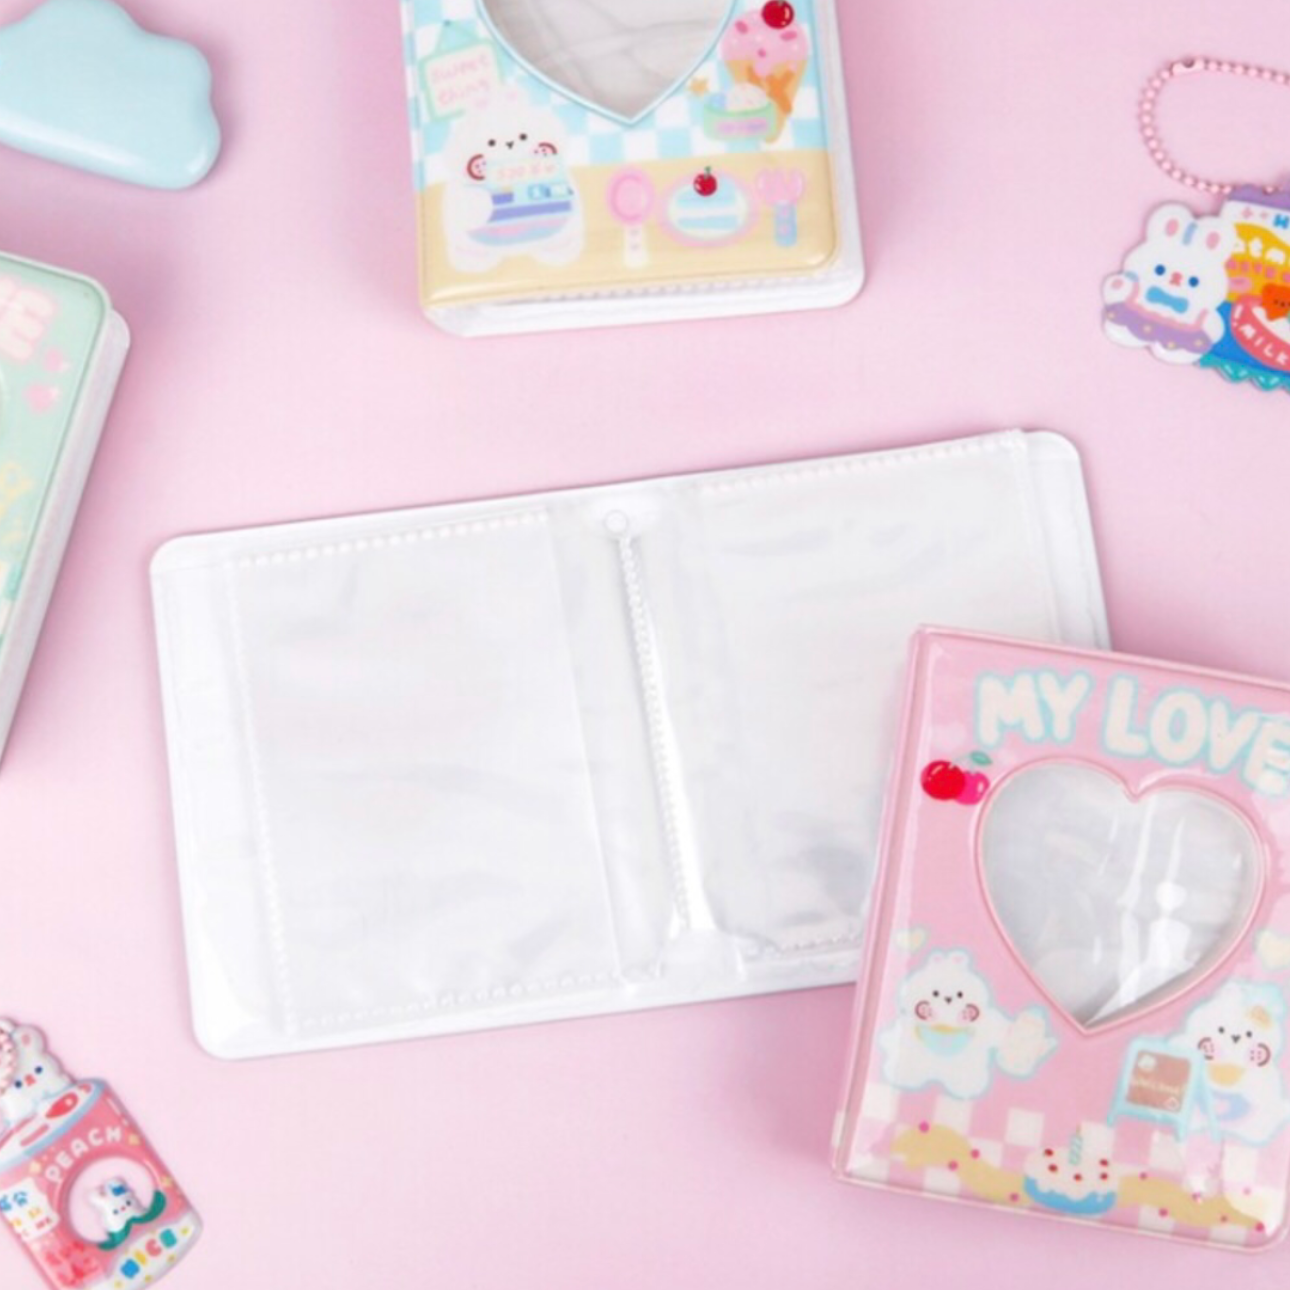 I Love Cute Stationery! + Mini Collection